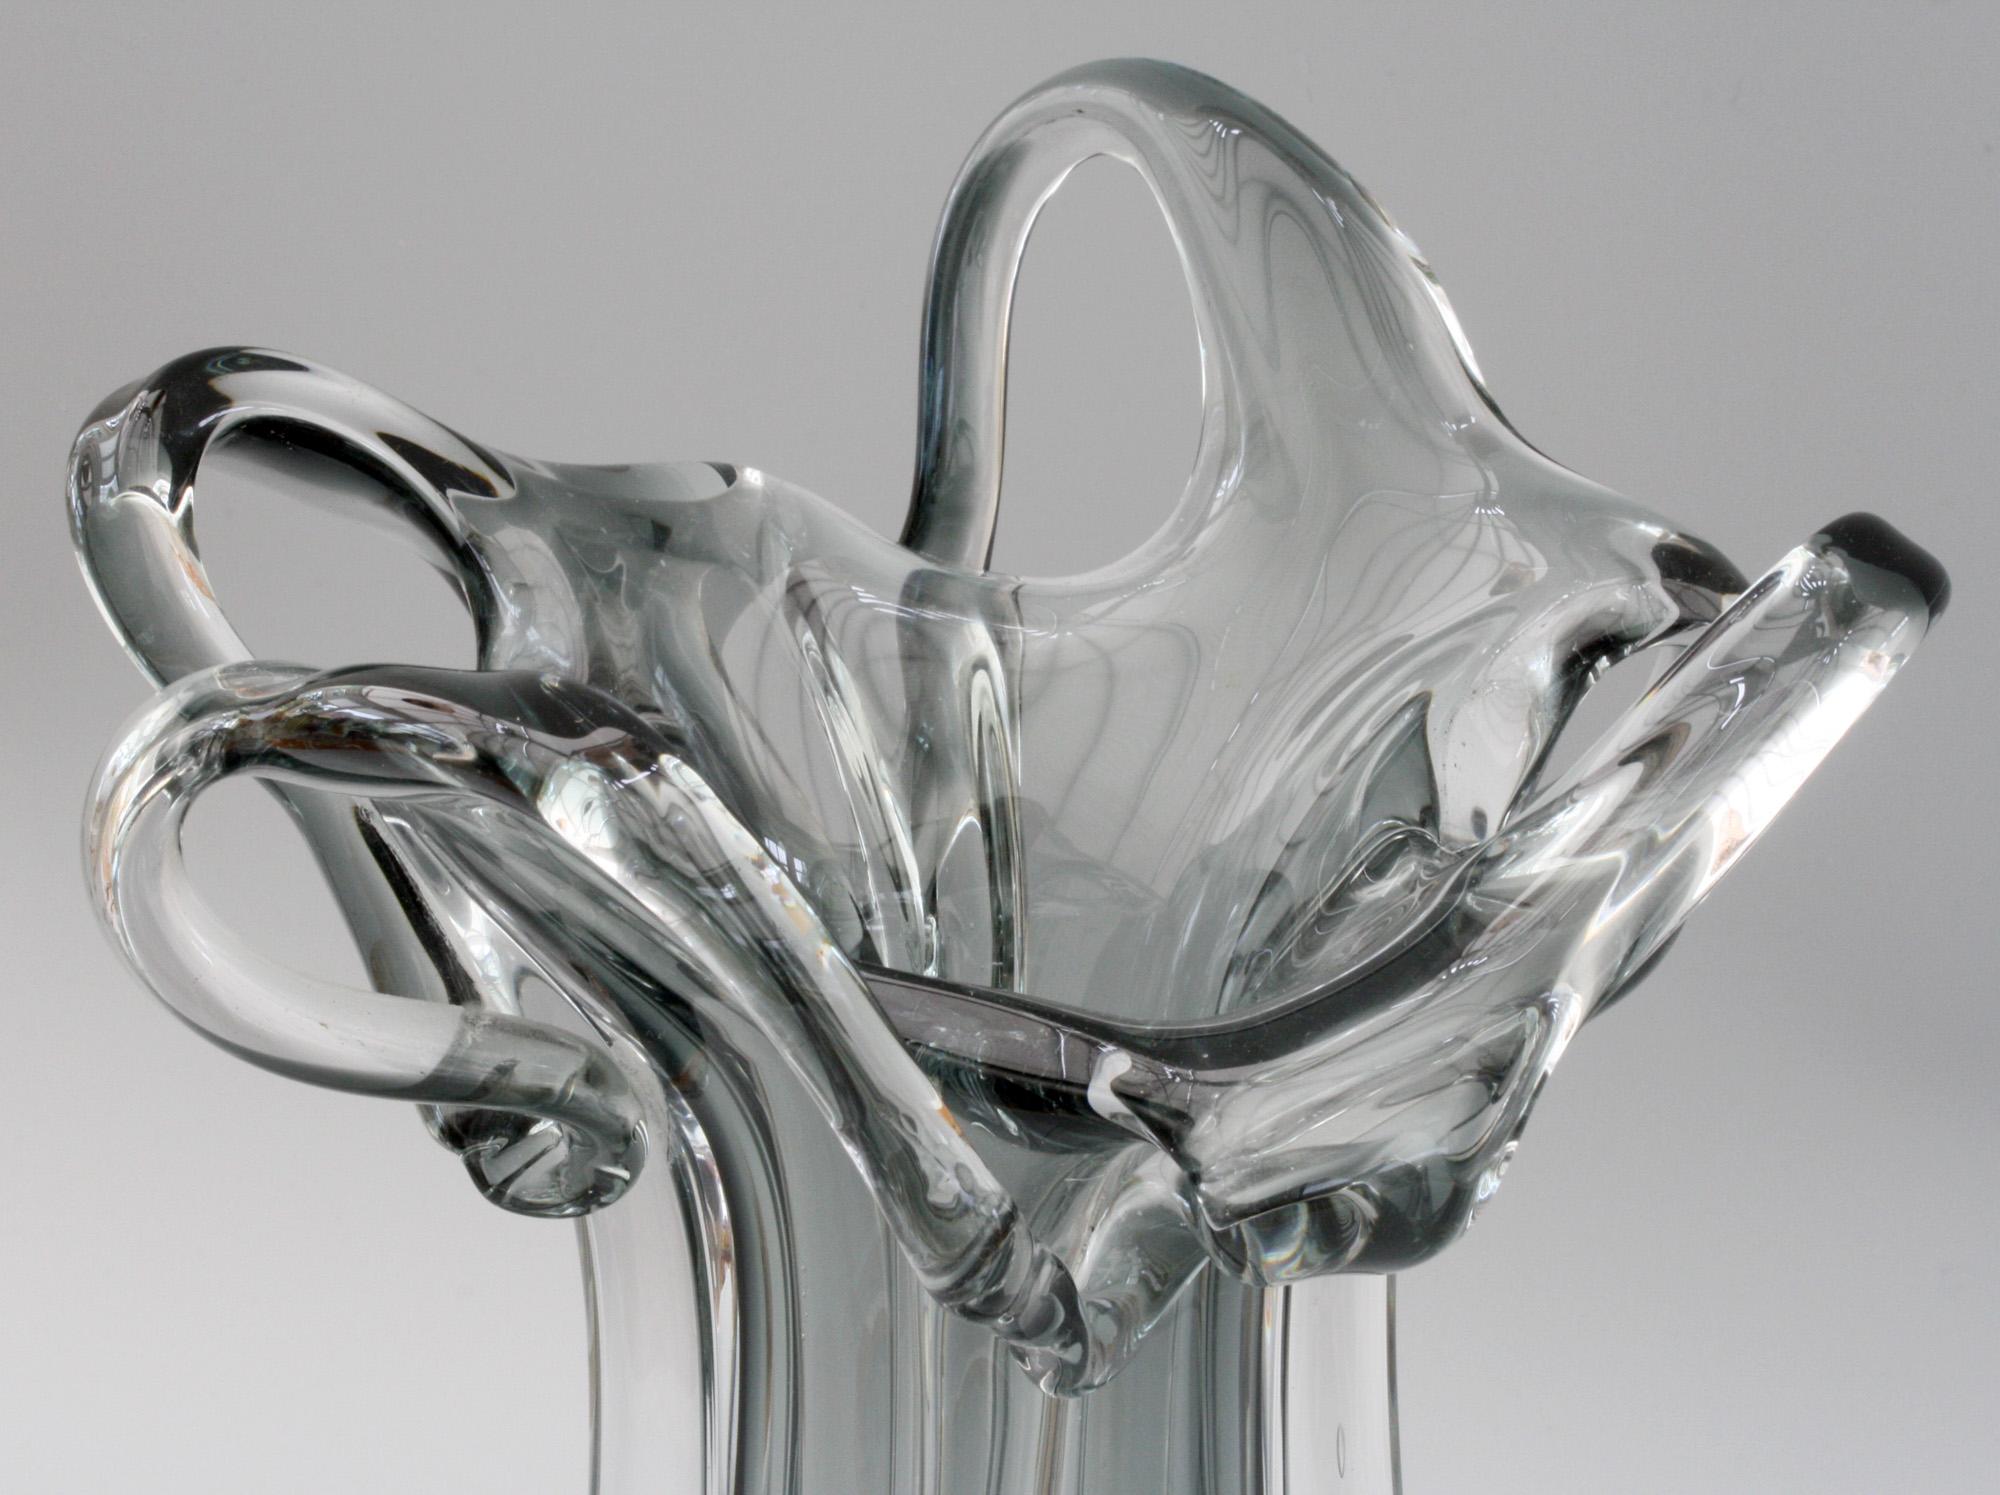 A stunning Italian Murano grey cased sculptural art glass vase dating from 1950-1970. This heavily made hand blown vase is made in clear glass with an encased grey glass centre the slender body with four wing like applications with extend to the top